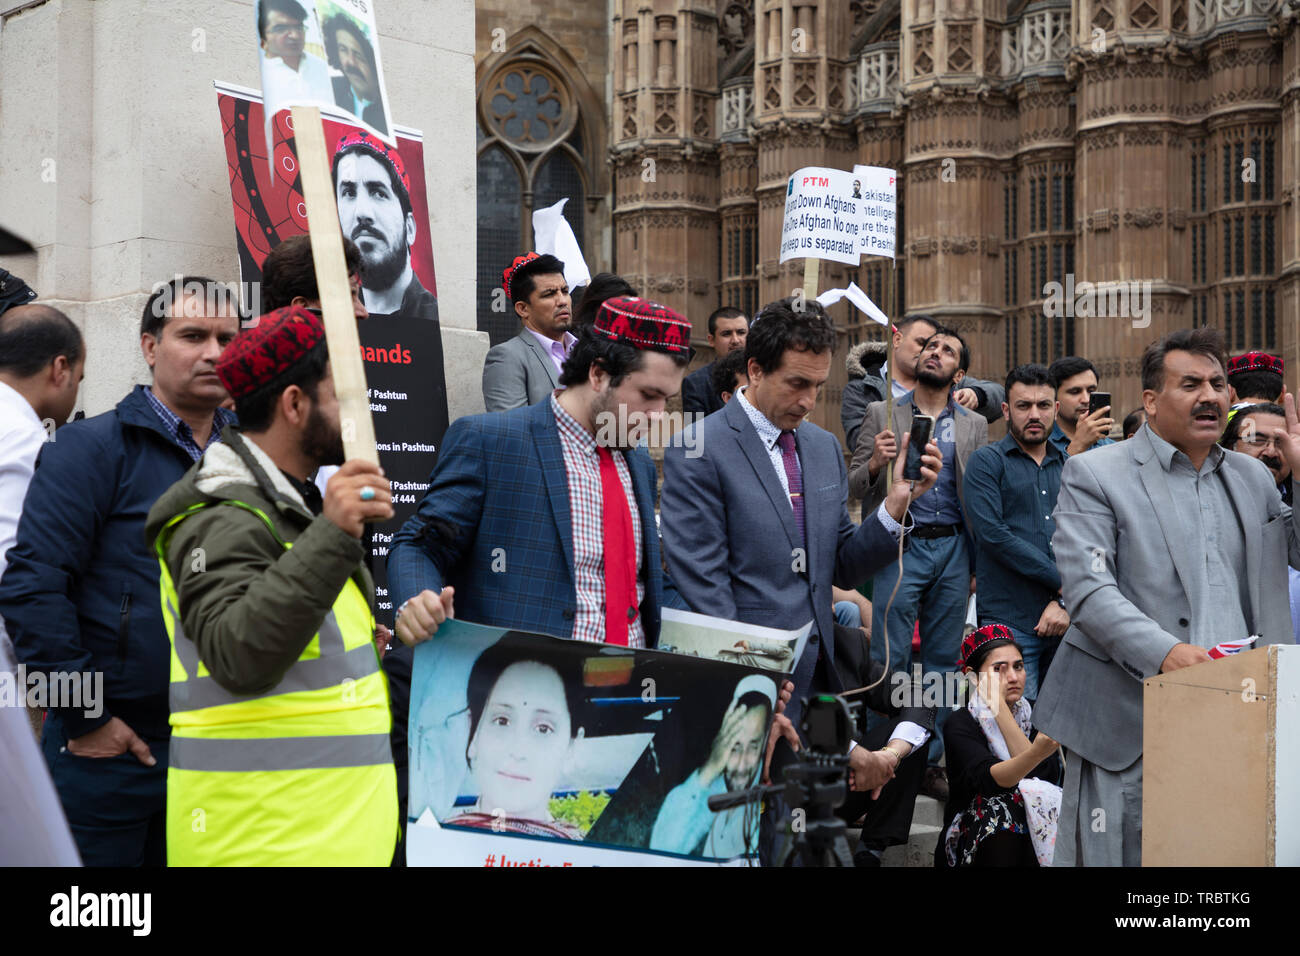 London, UK. 30th May 2019. Pashtuns protest opposite the House of Parliament in London against alleged persecution and atrocities by fundamentalist groups, the Pakistani army and Pakistani Intelligence Service committing brutal killings, the demolishing of properties, disappearances and extra-judicial killings of Pashtuns and members of other tribes in Pakistan. Credit: Joe Kuis / Alamy Stock Photo